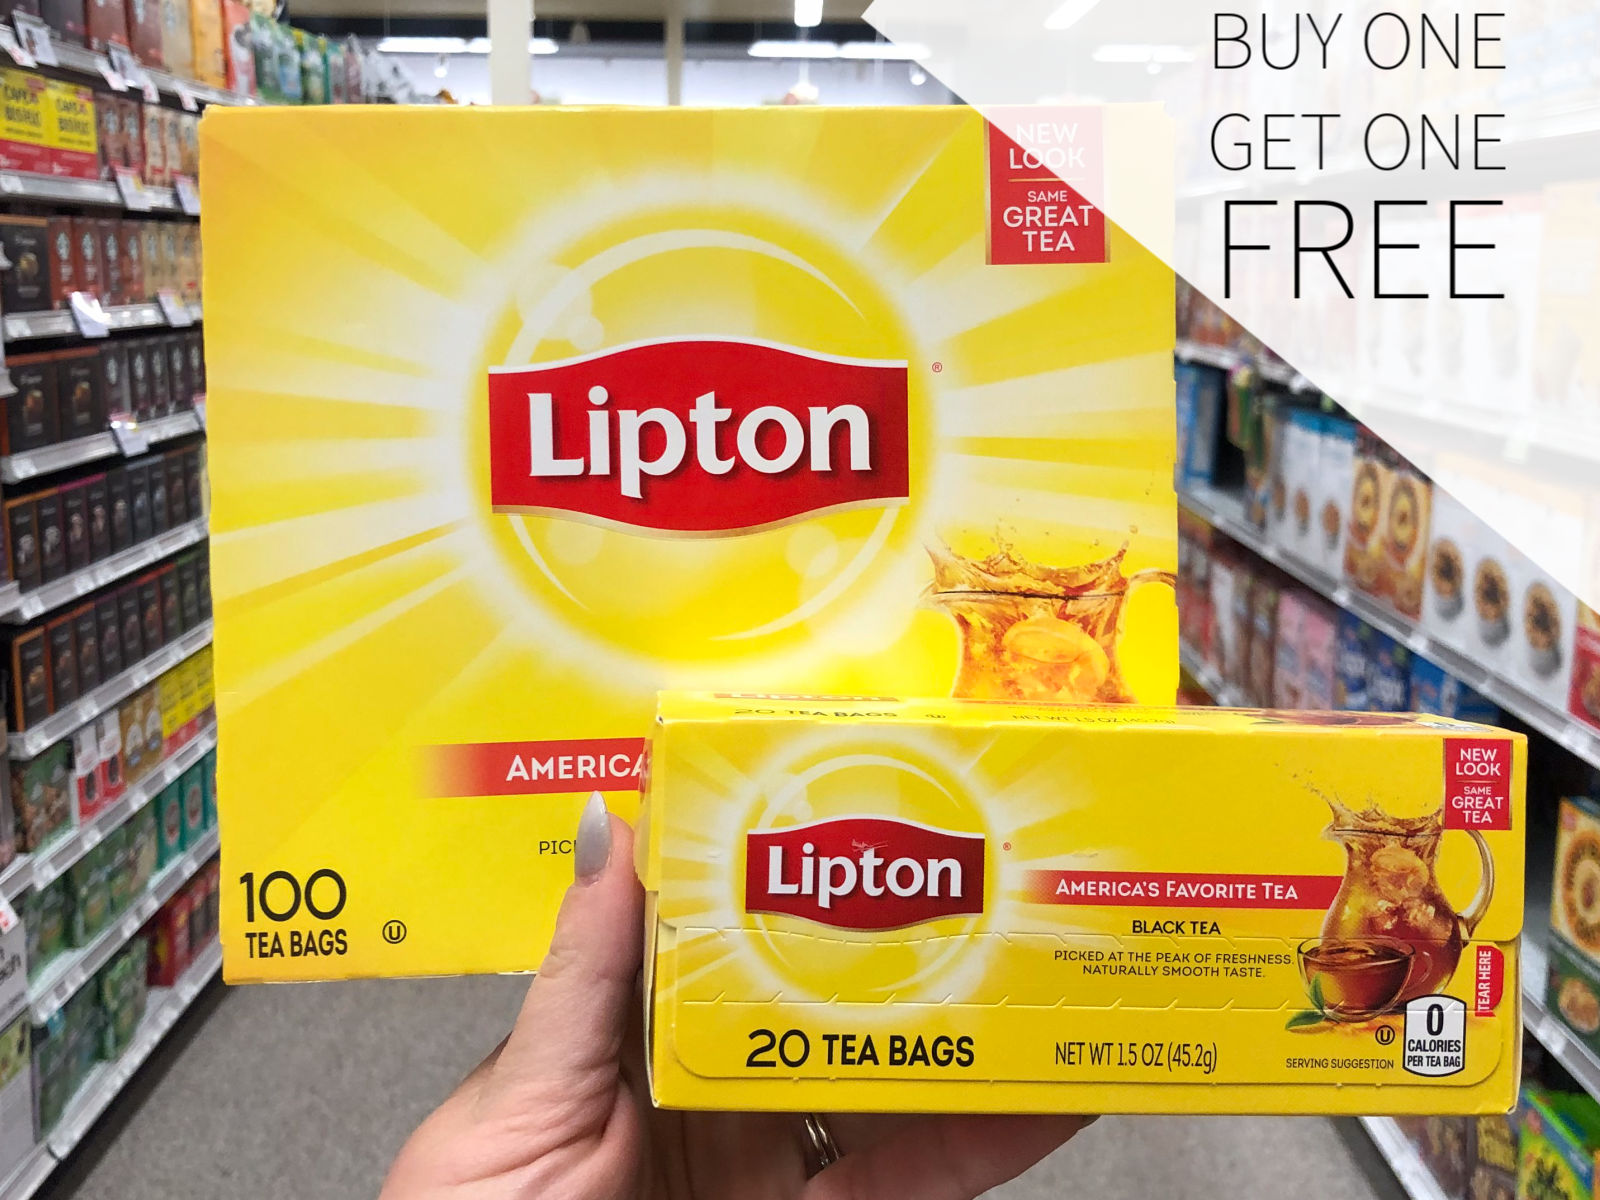 Amazing Deals On Lipton Tea At Publix - Stock Up For The Holidays! on I Heart Publix 1